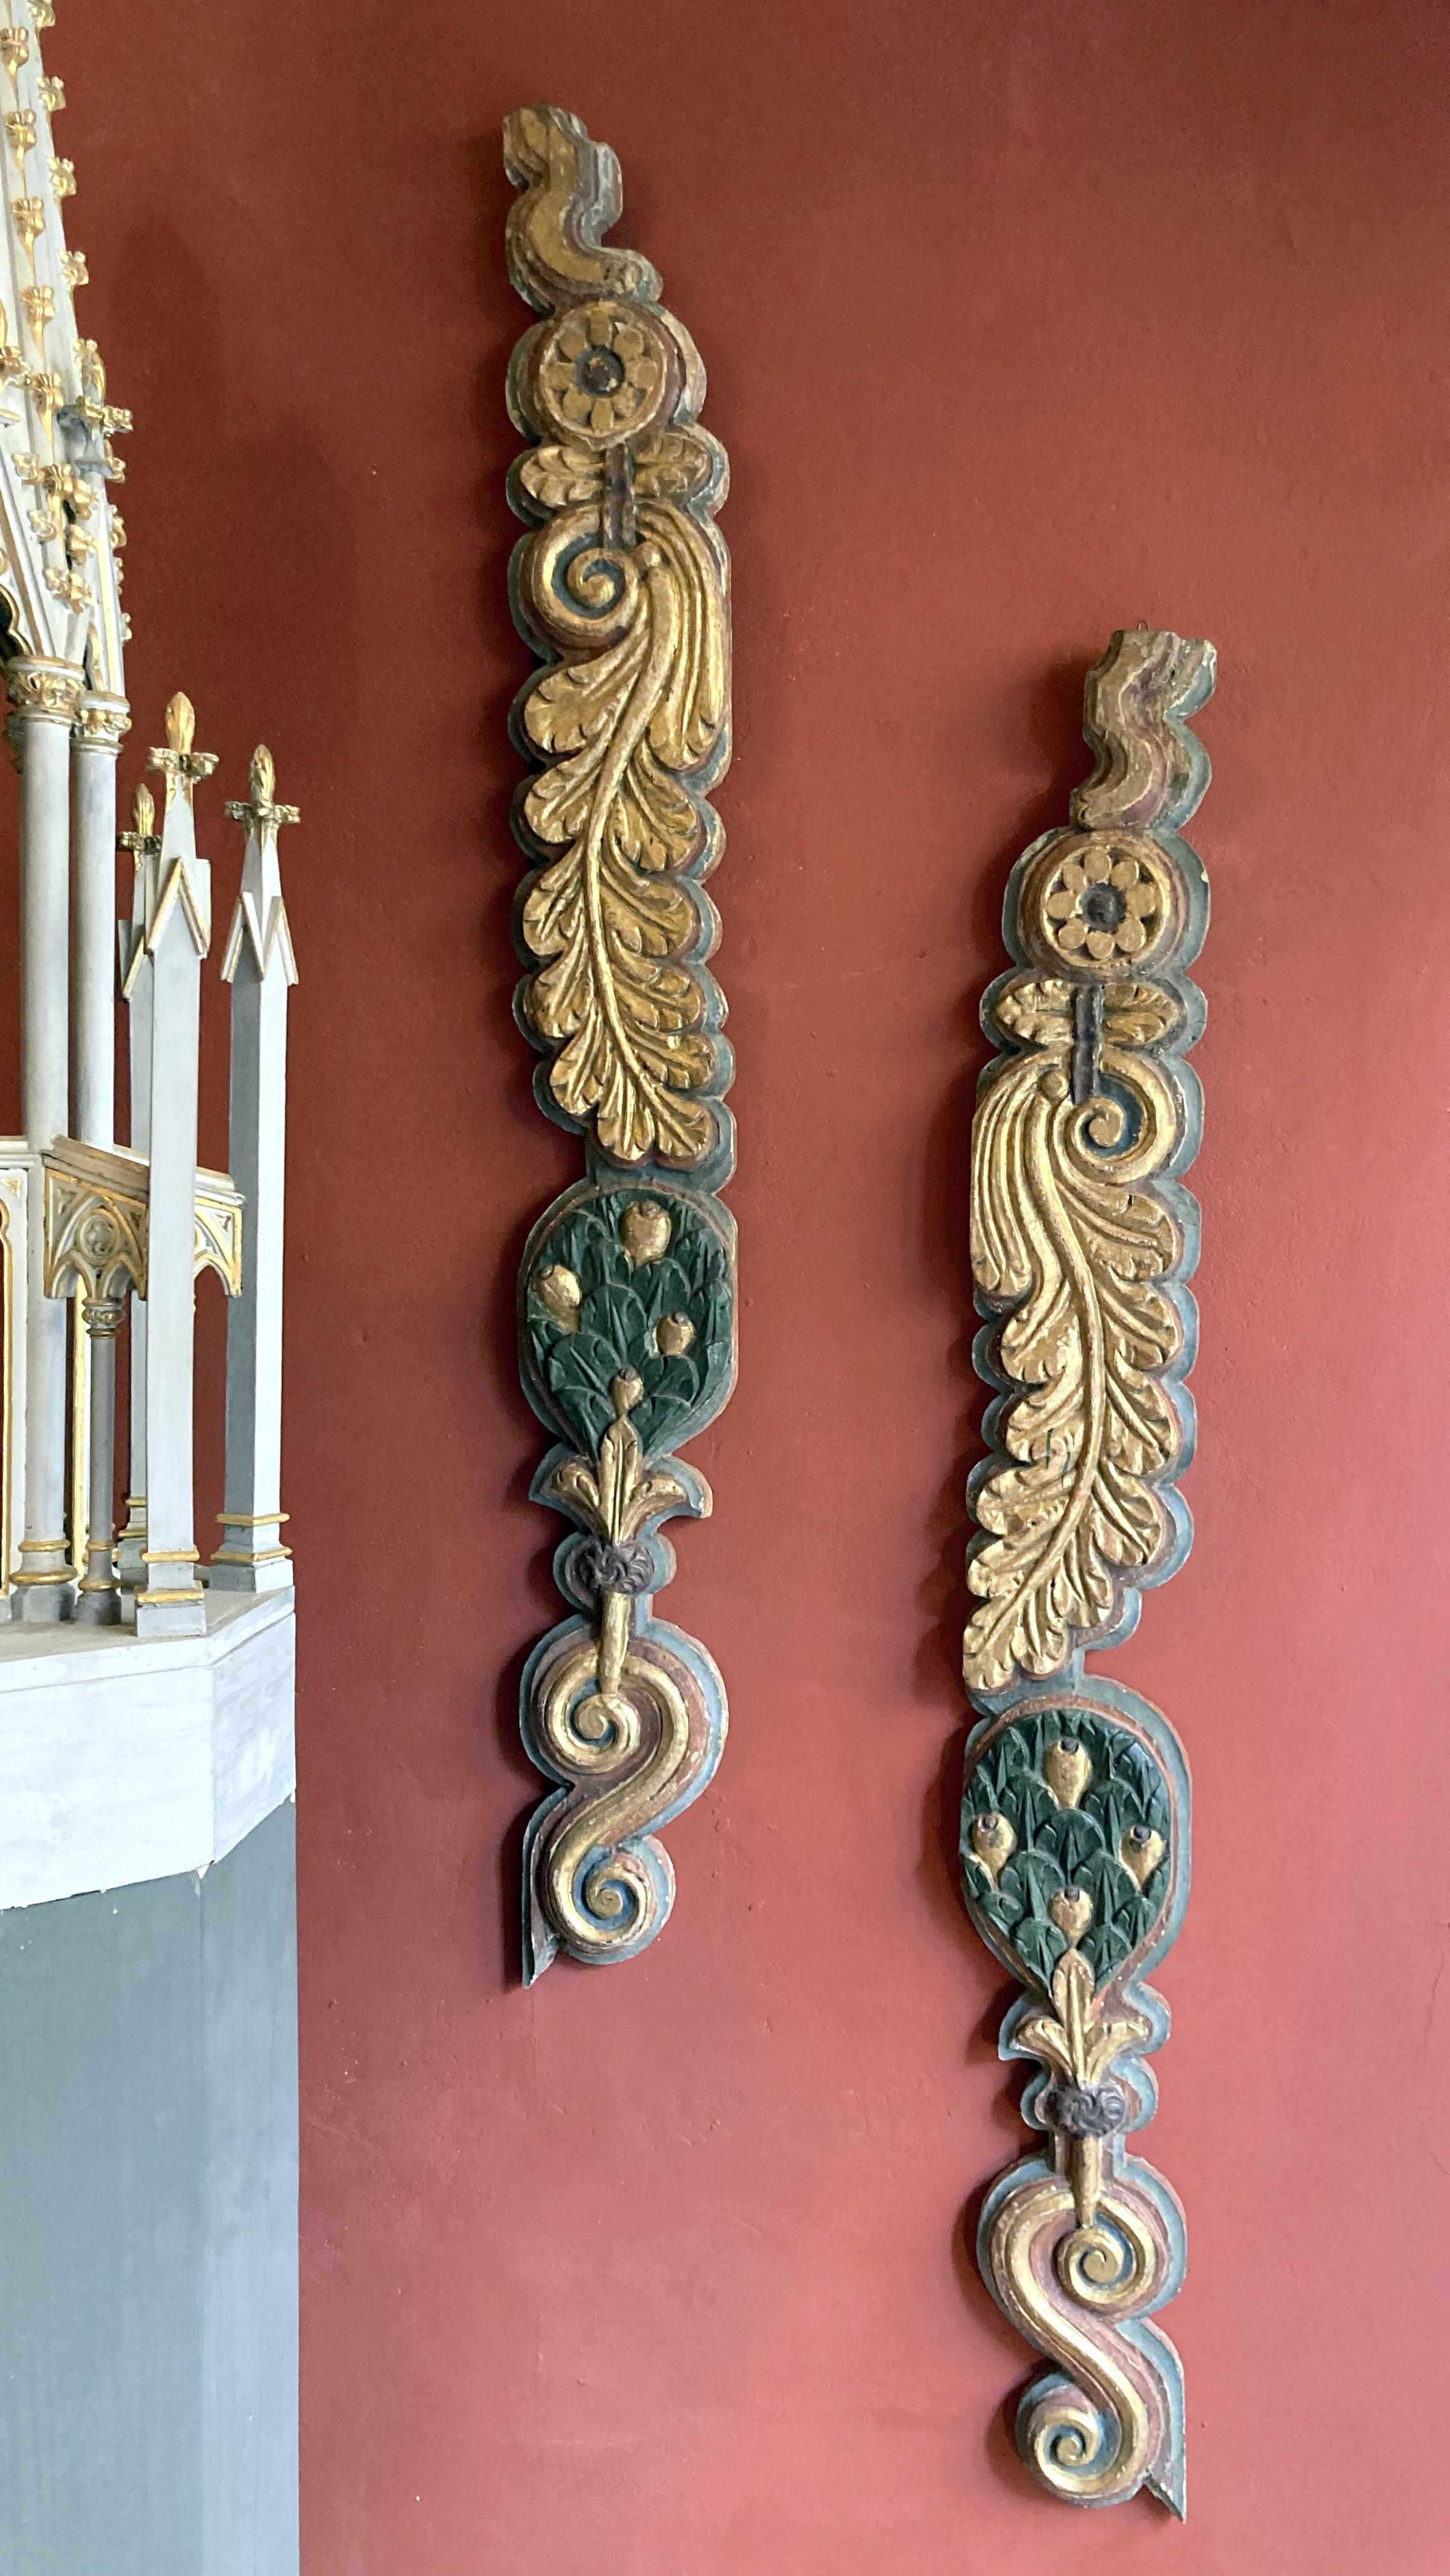 This pair of Italian 18th century (early 1700) hugely decorative archictectural pilasters friezes is deeply hand carved with a wonderful compositions of fruits, flowers and leaves, the whole hand painted, lacquered and gilded. These pillars are an